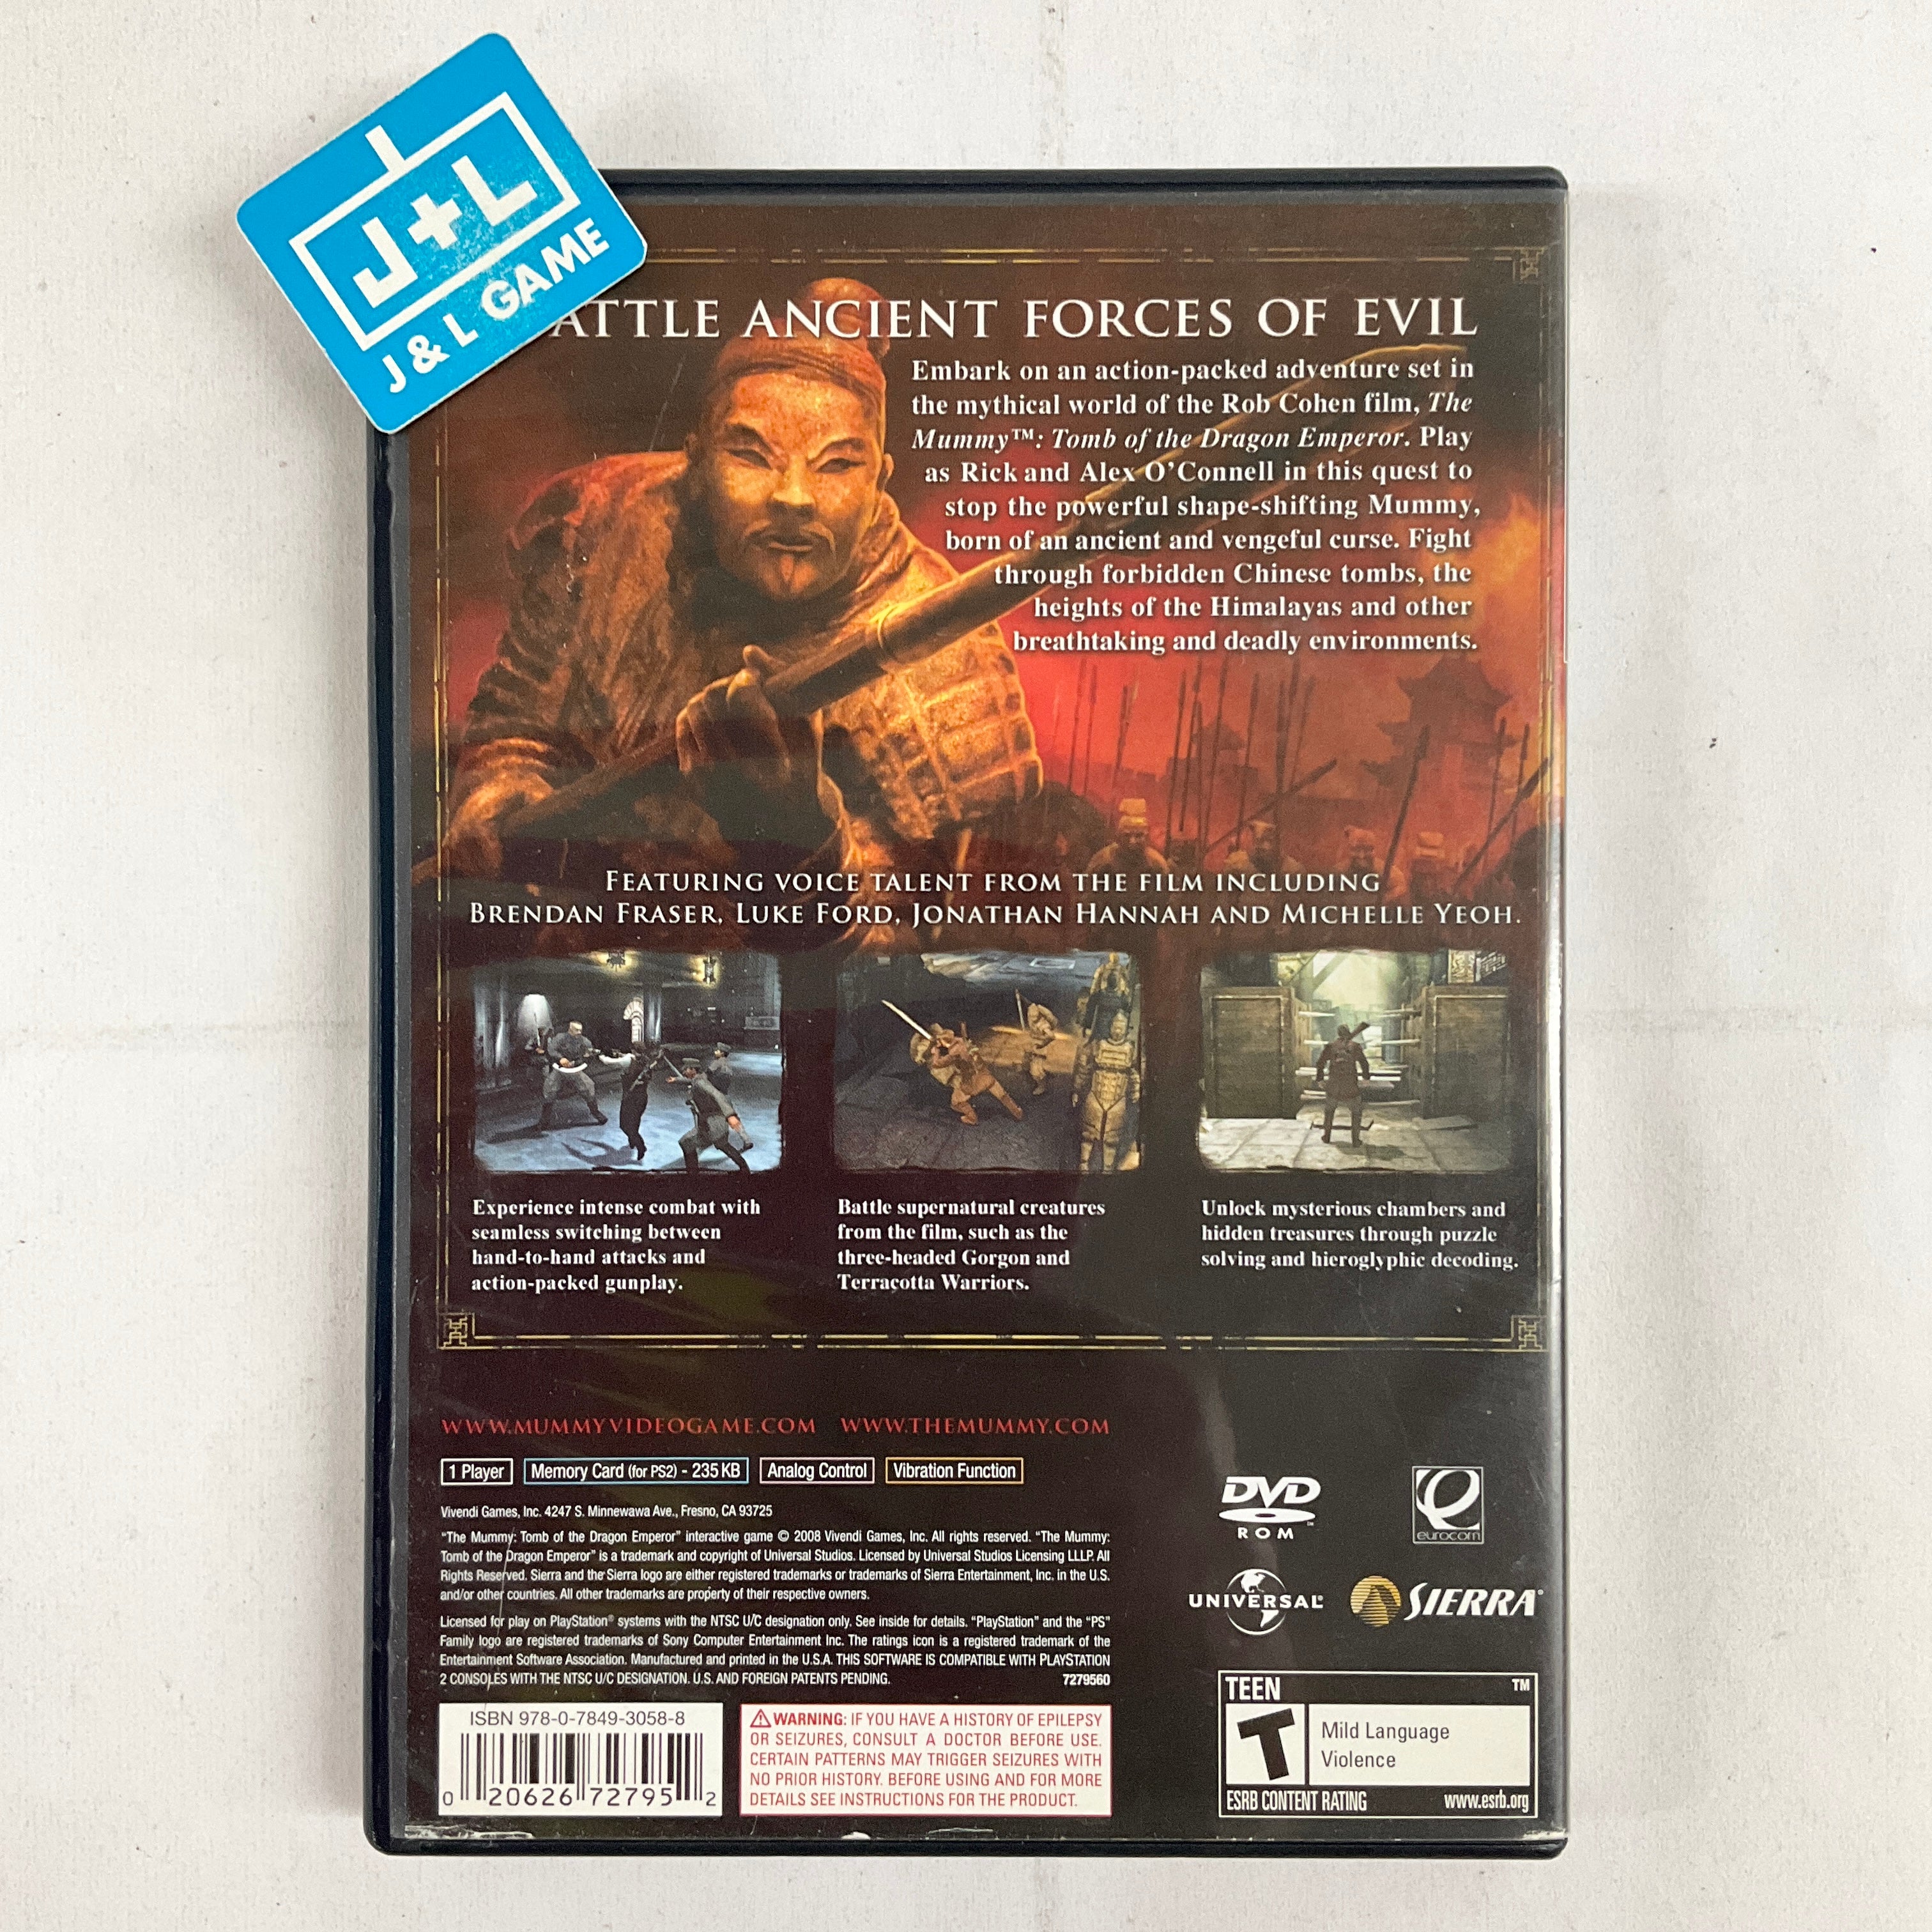 The Mummy: Tomb of the Dragon Emperor - (PS2) PlayStation 2 [Pre-Owned] Video Games Sierra Entertainment   